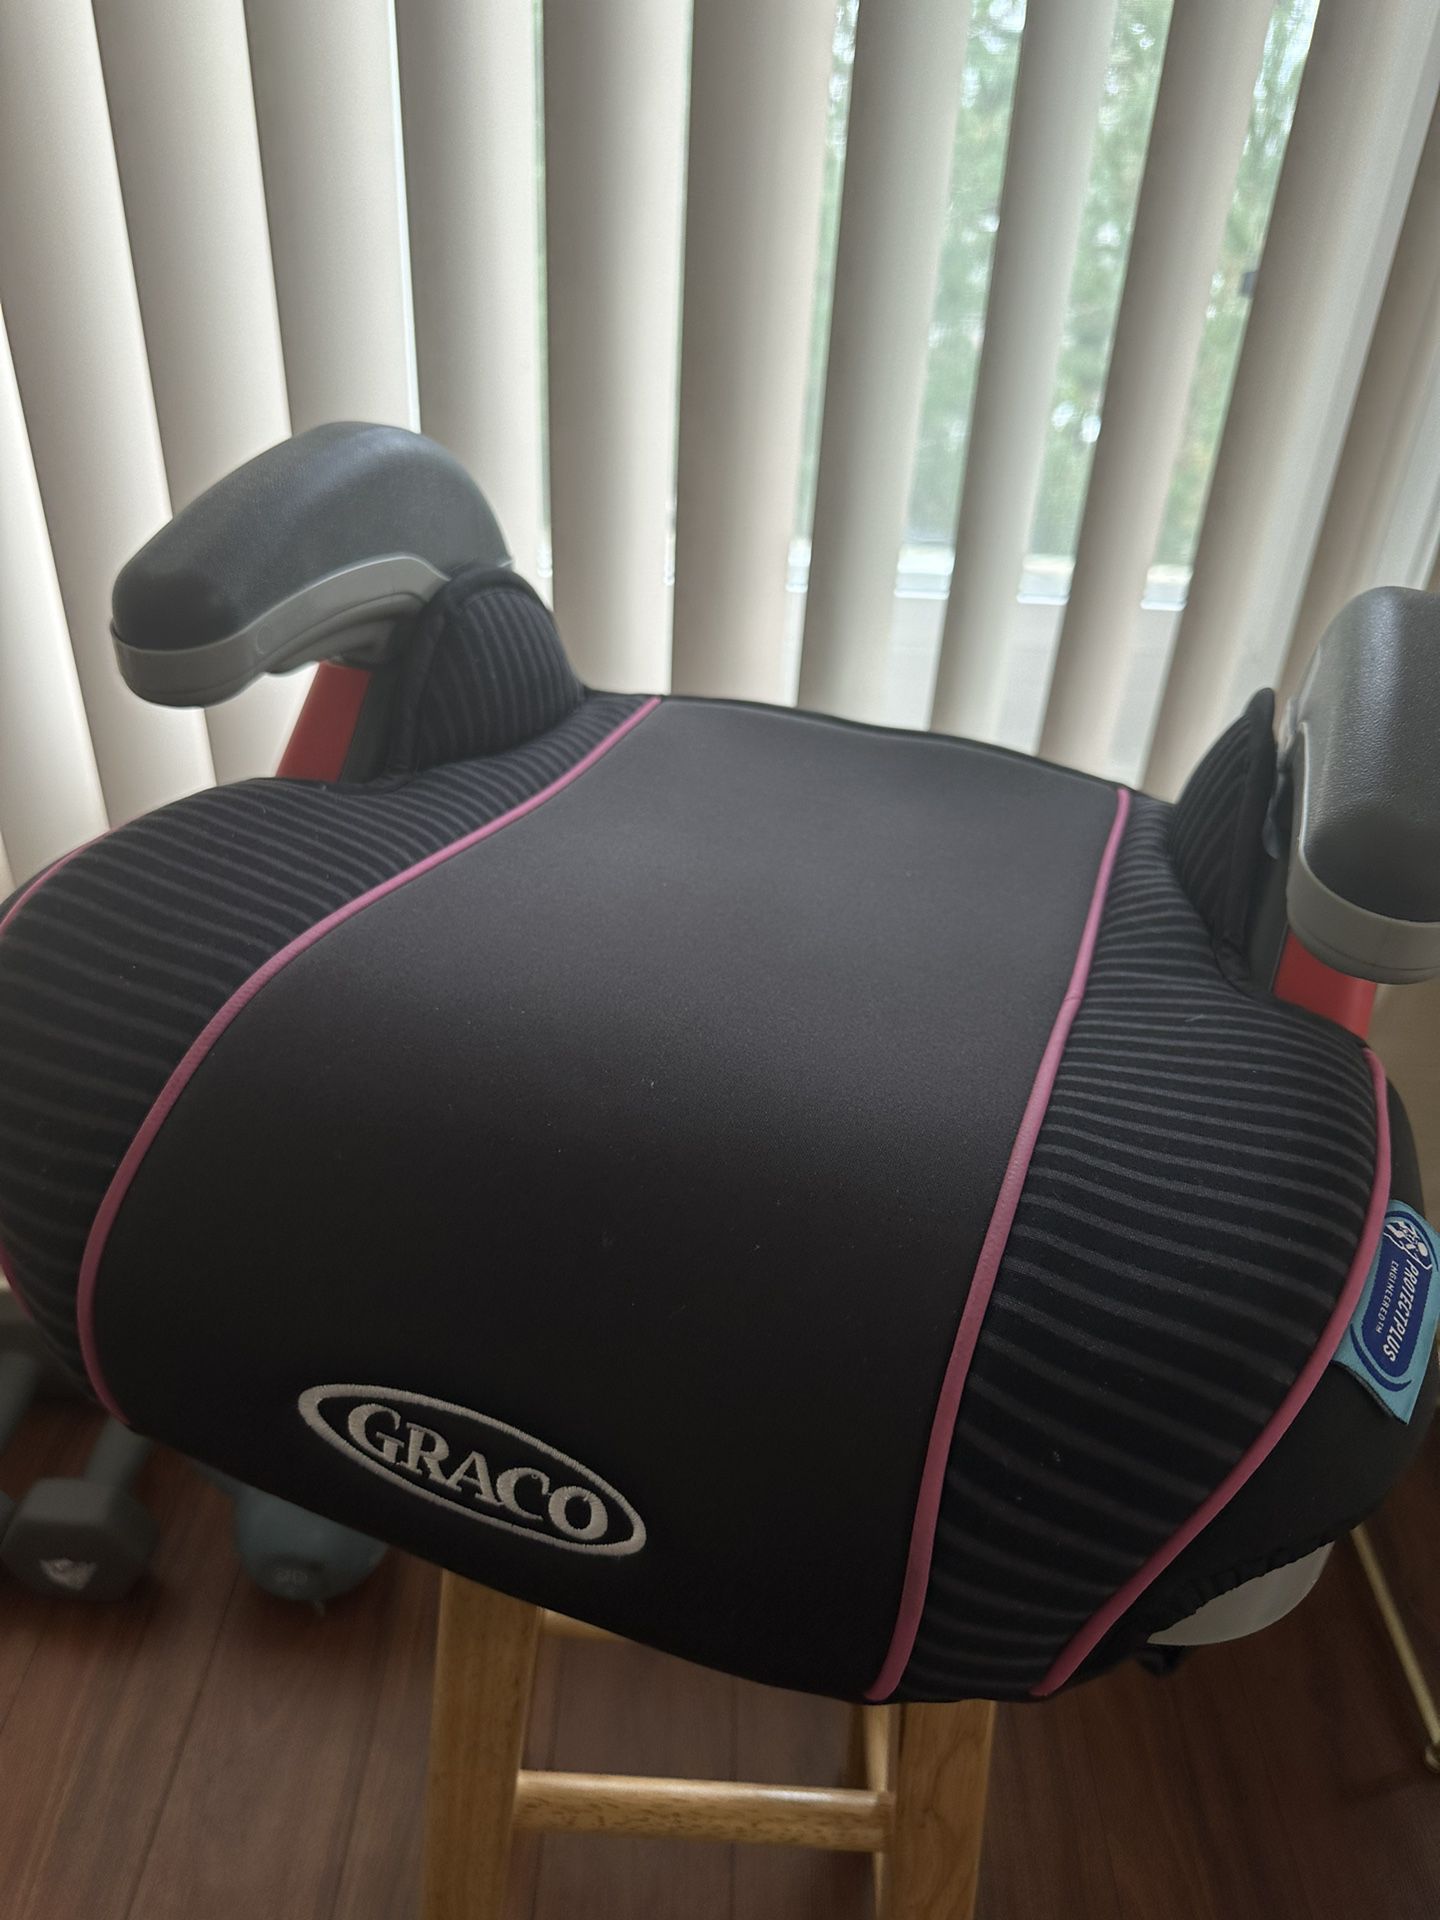 Graco Turbo Booster Seat